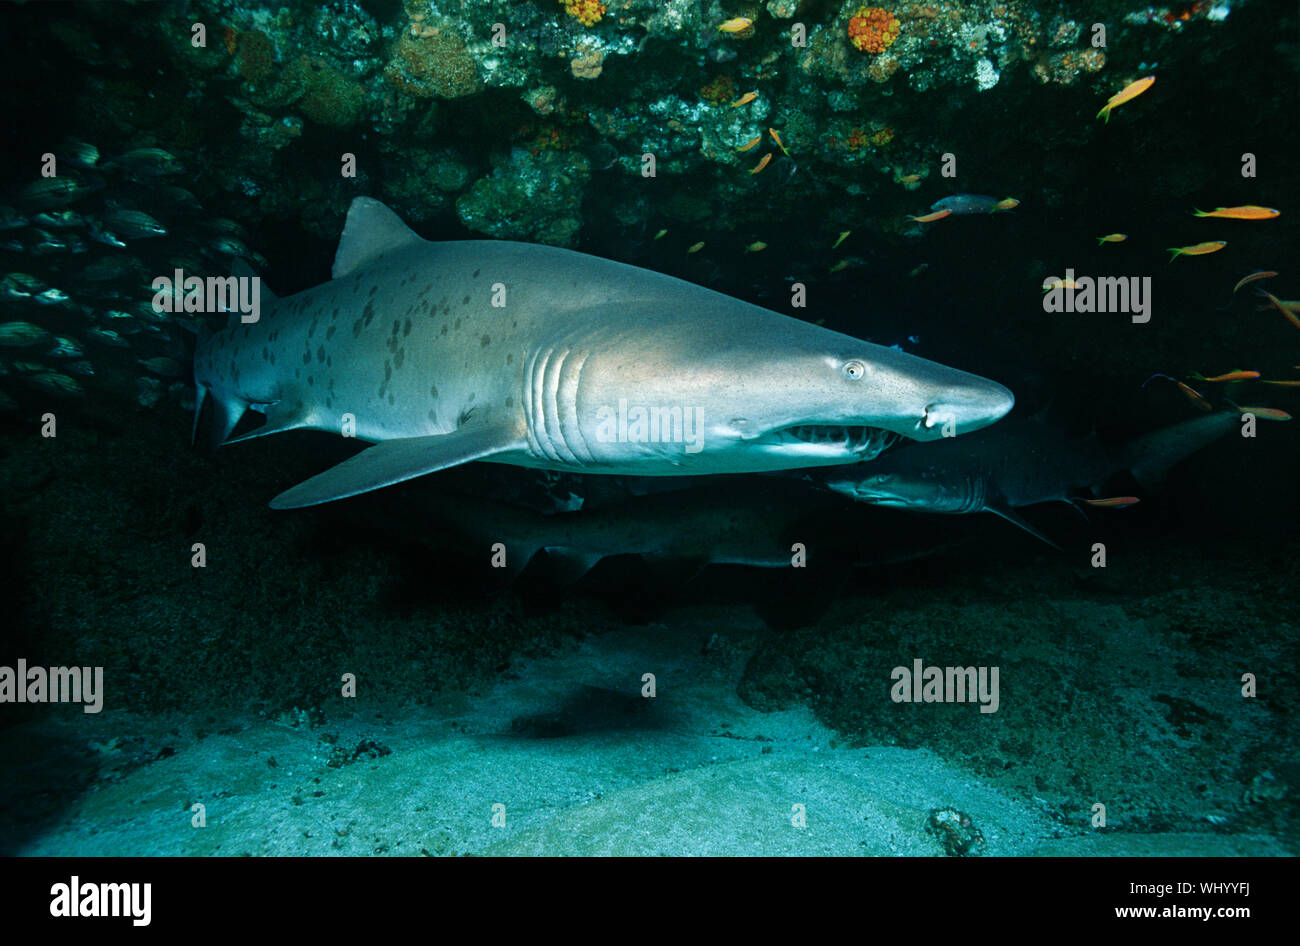 Aliwal Shoal, Indian Ocean, South Africa, Sand tiger shark (Carcharias taurus) in cave Stock Photo